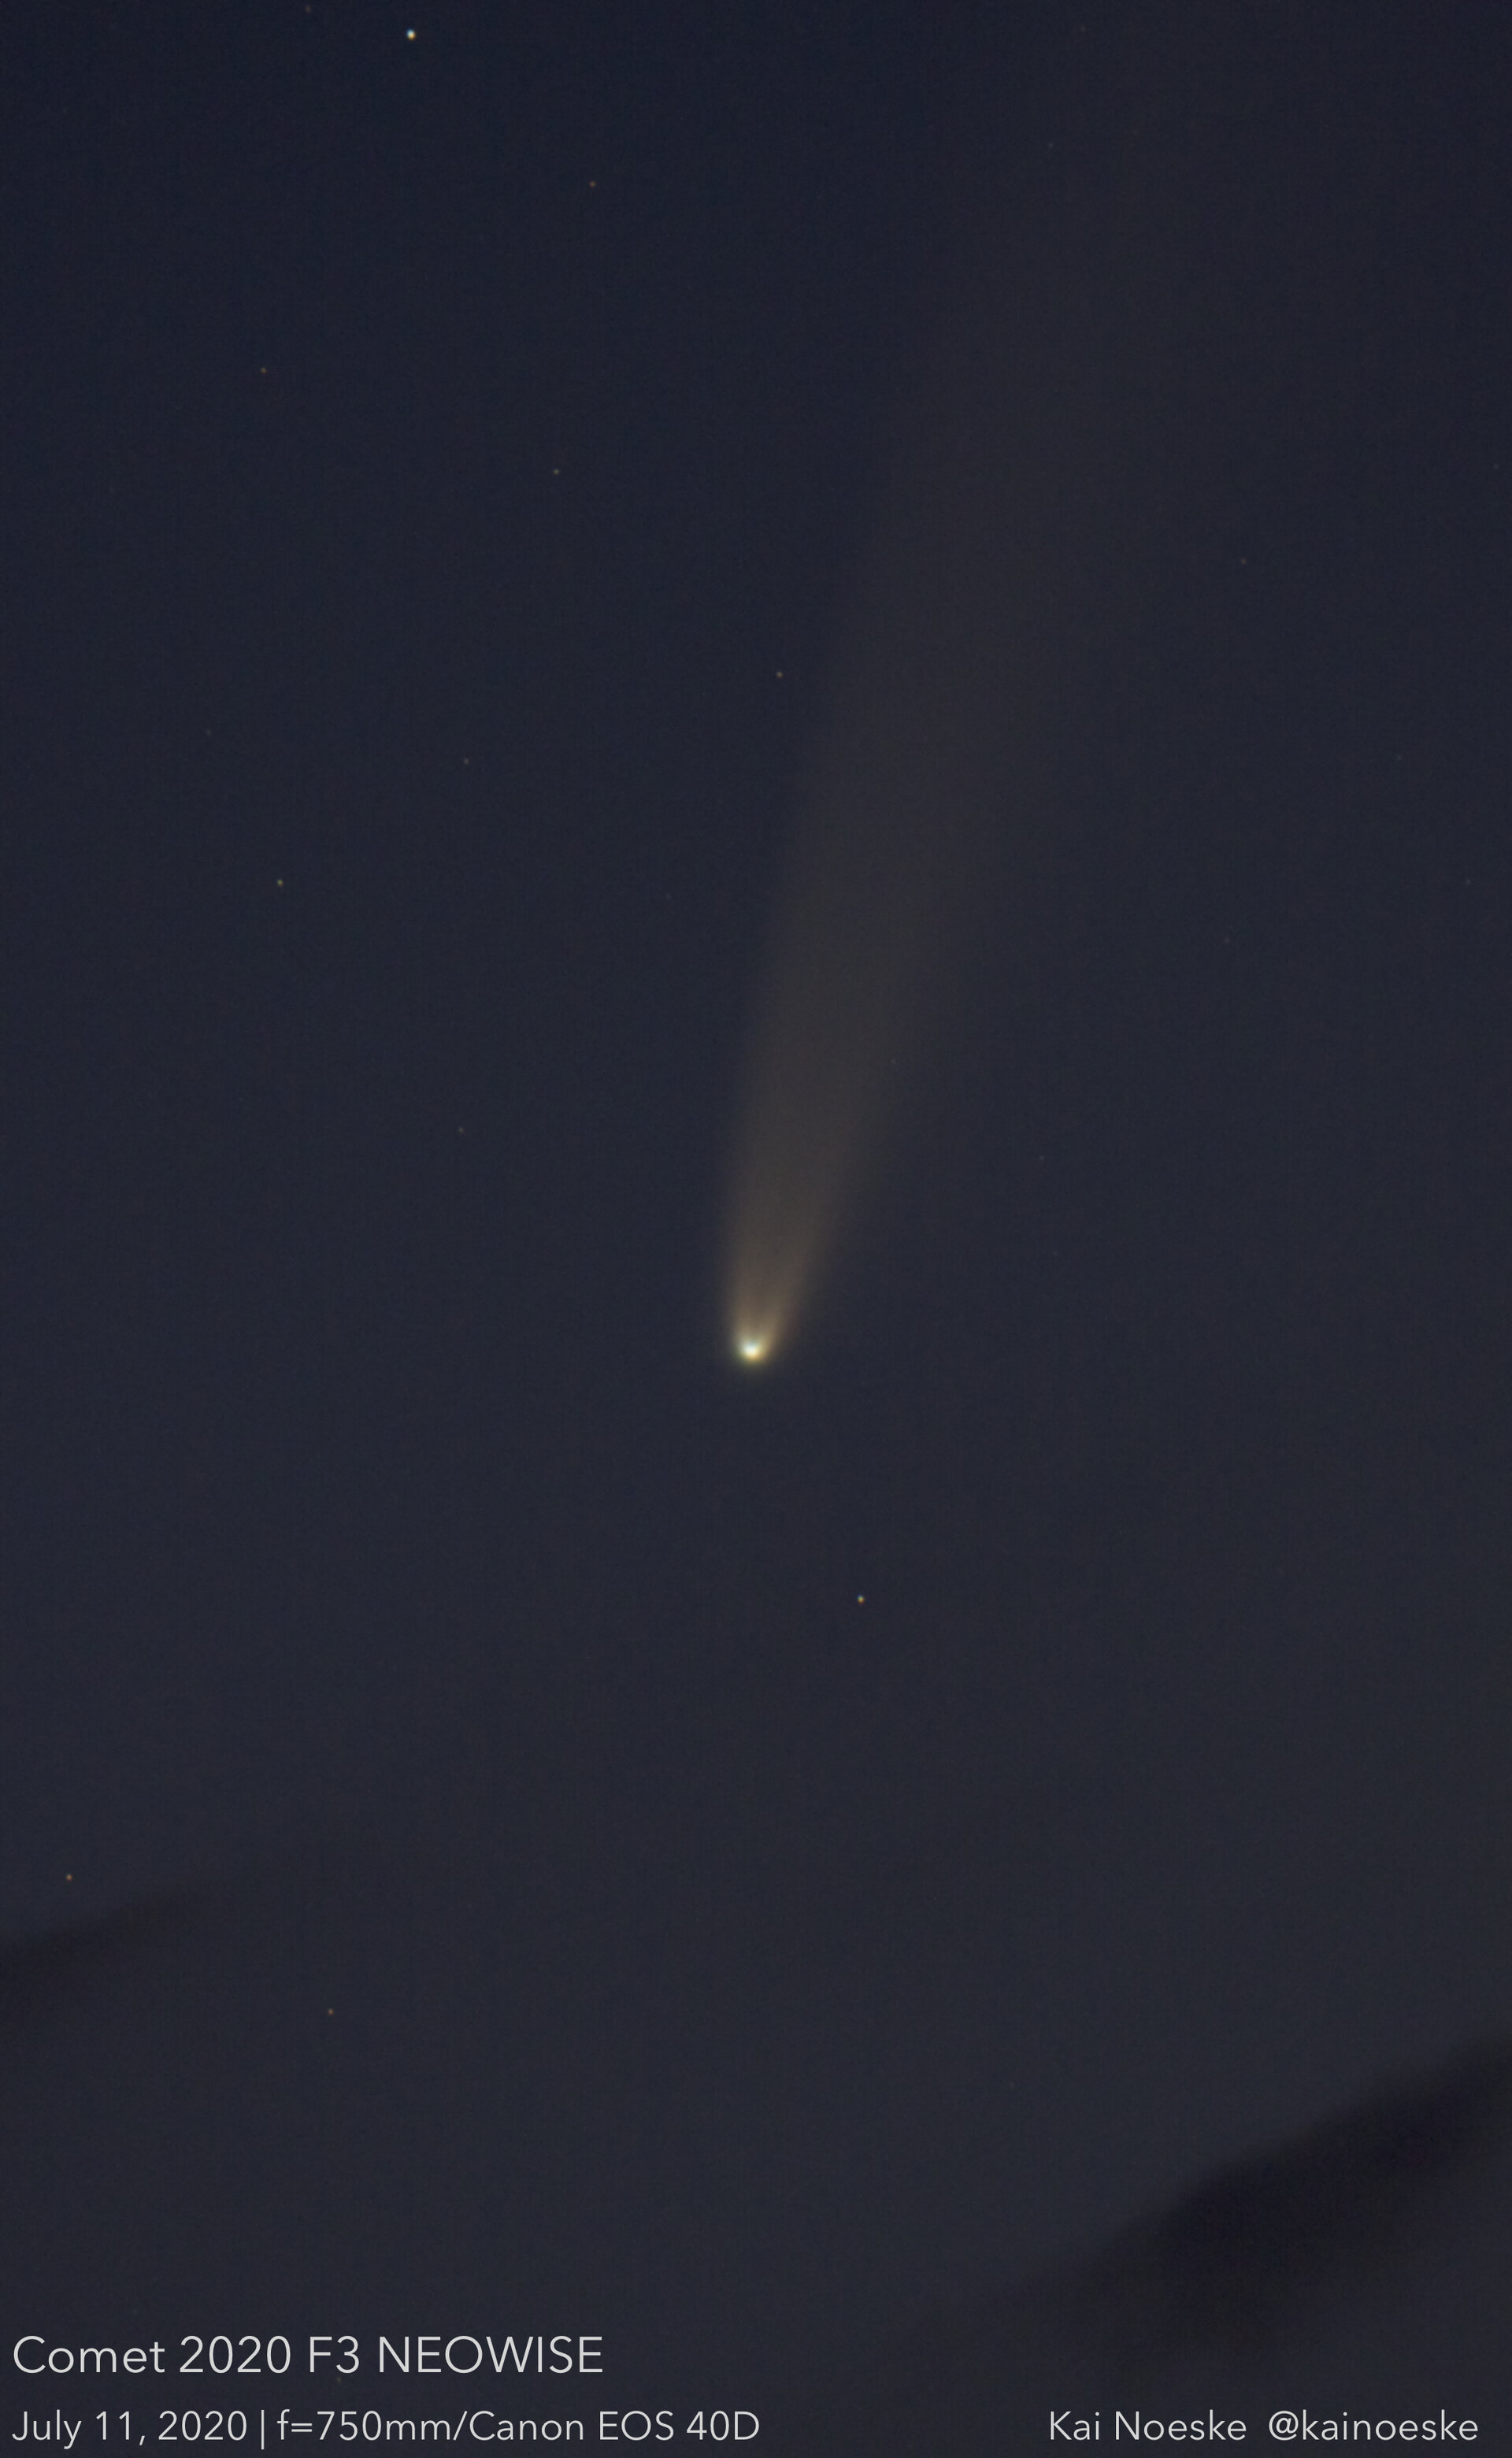 Comet NEOWISE on 11 July 2020